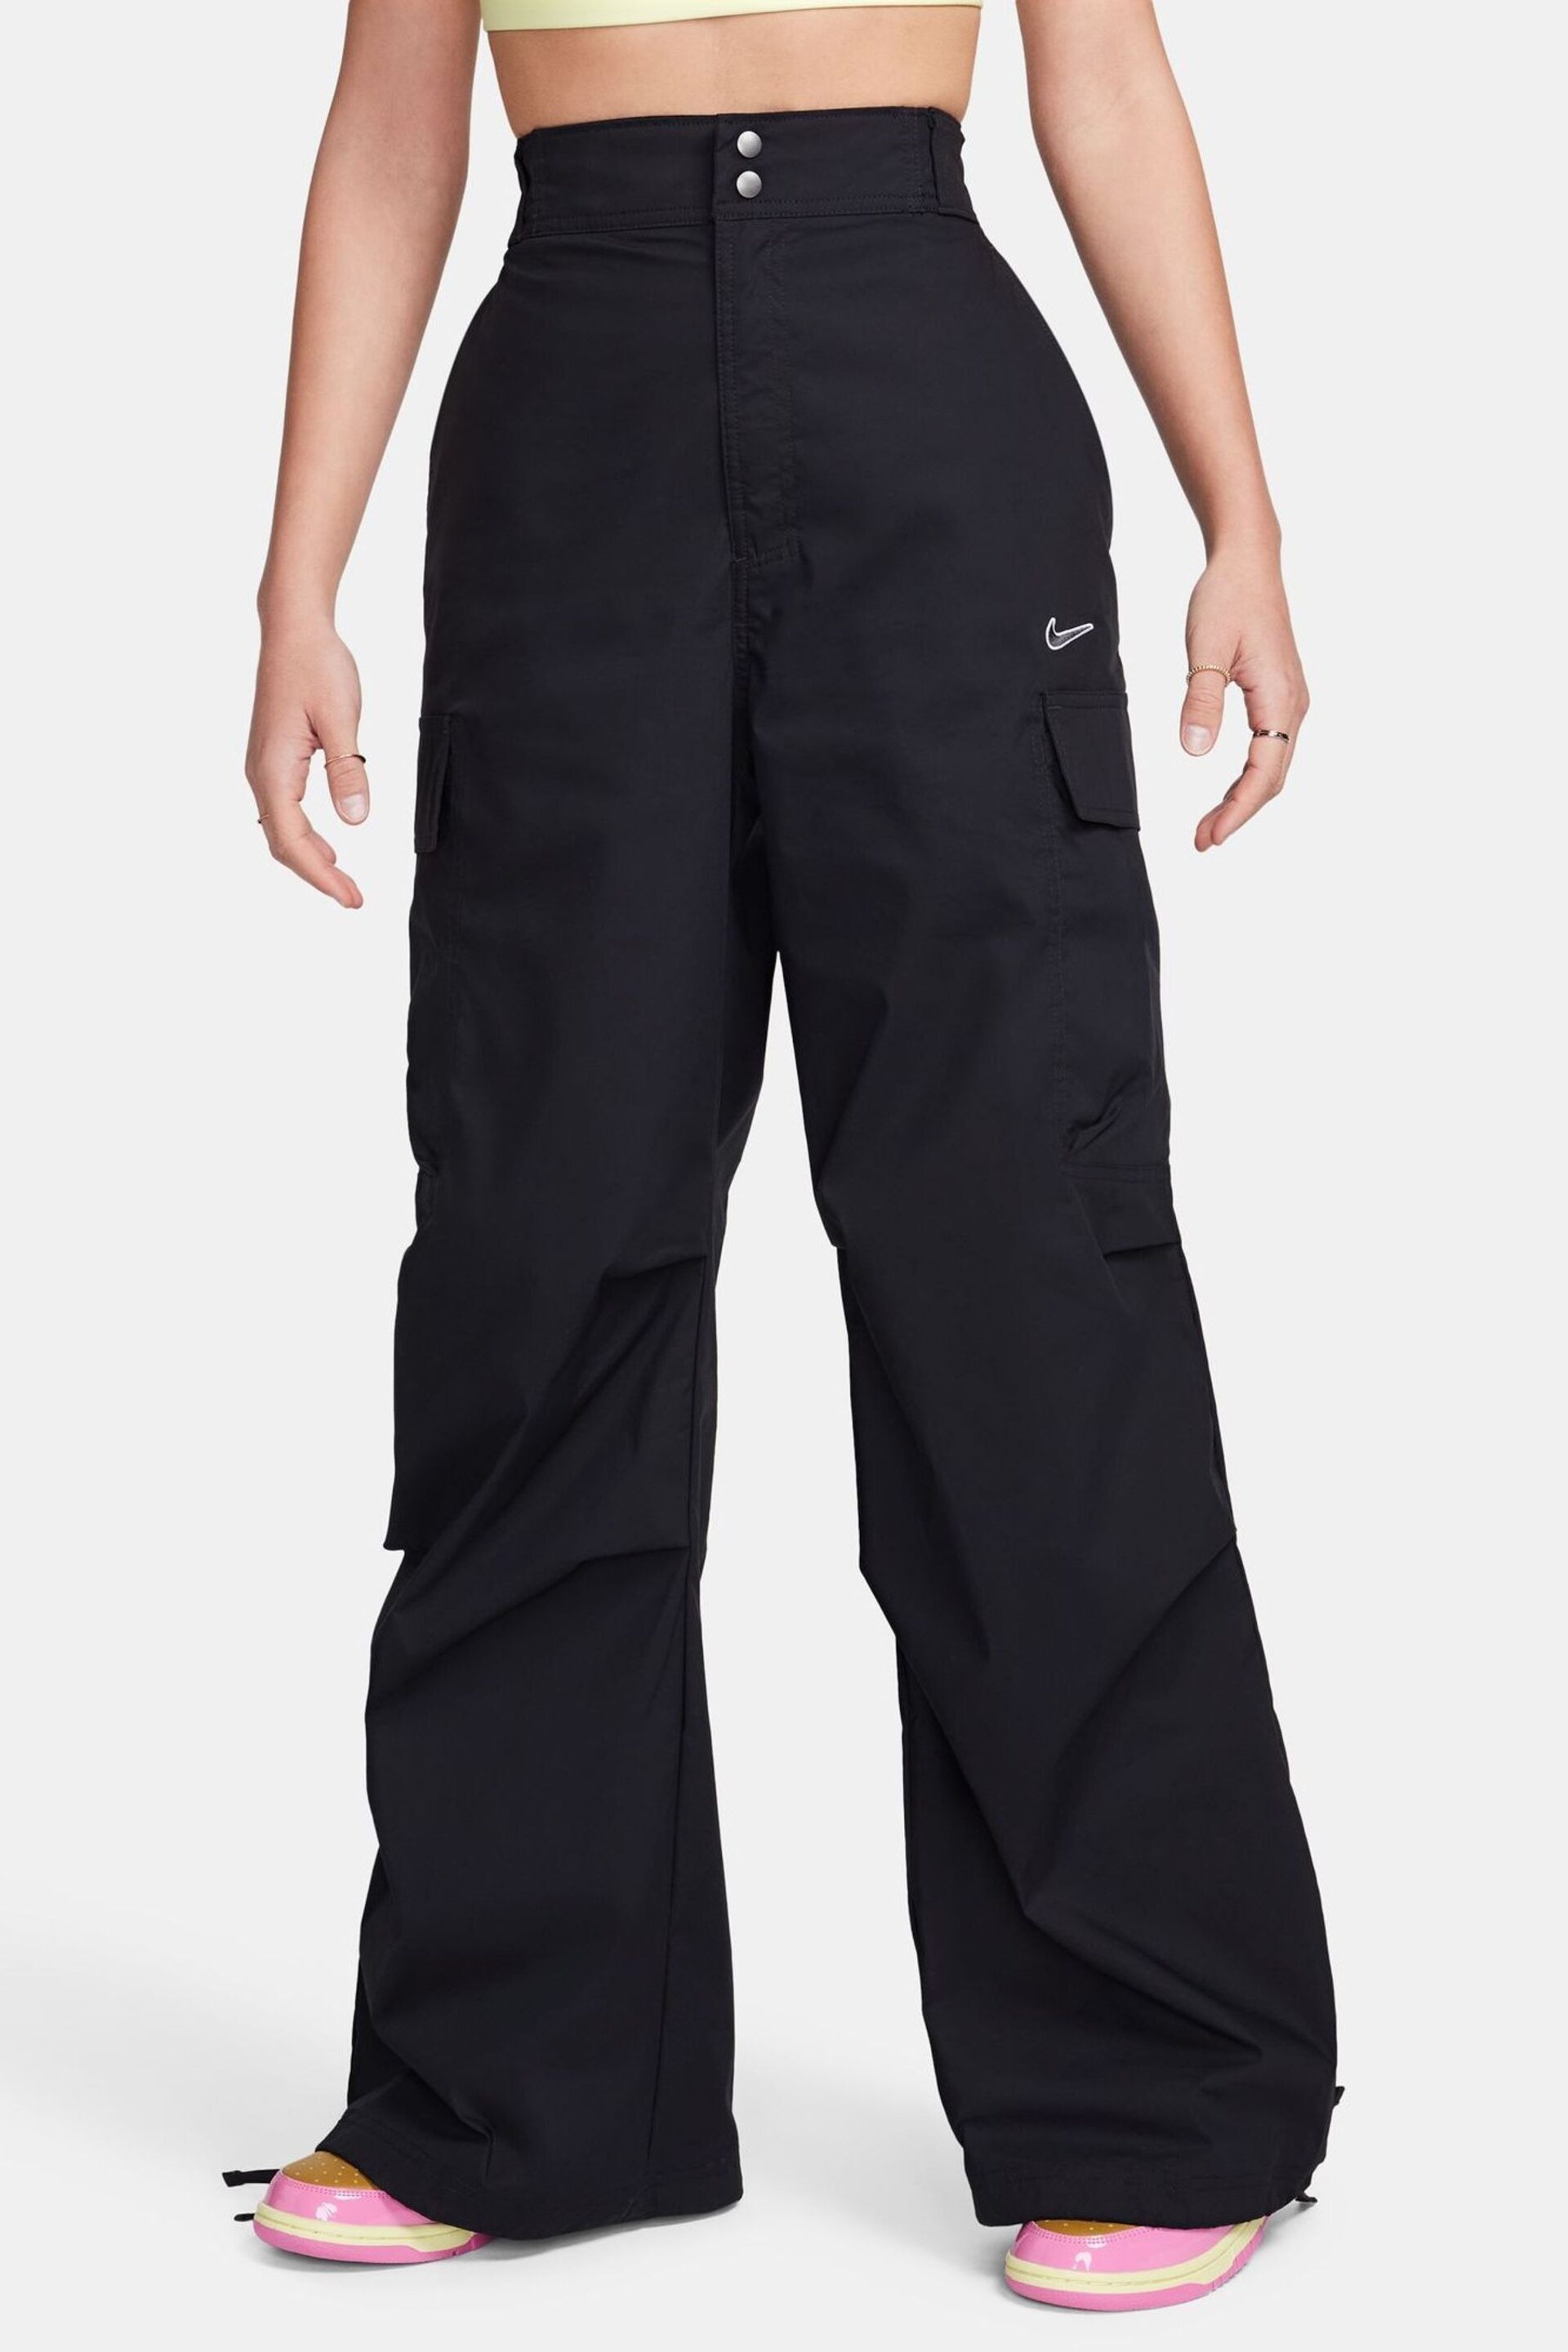 Nike Black High Rise Woven Oversized Trousers - Image 1 of 6